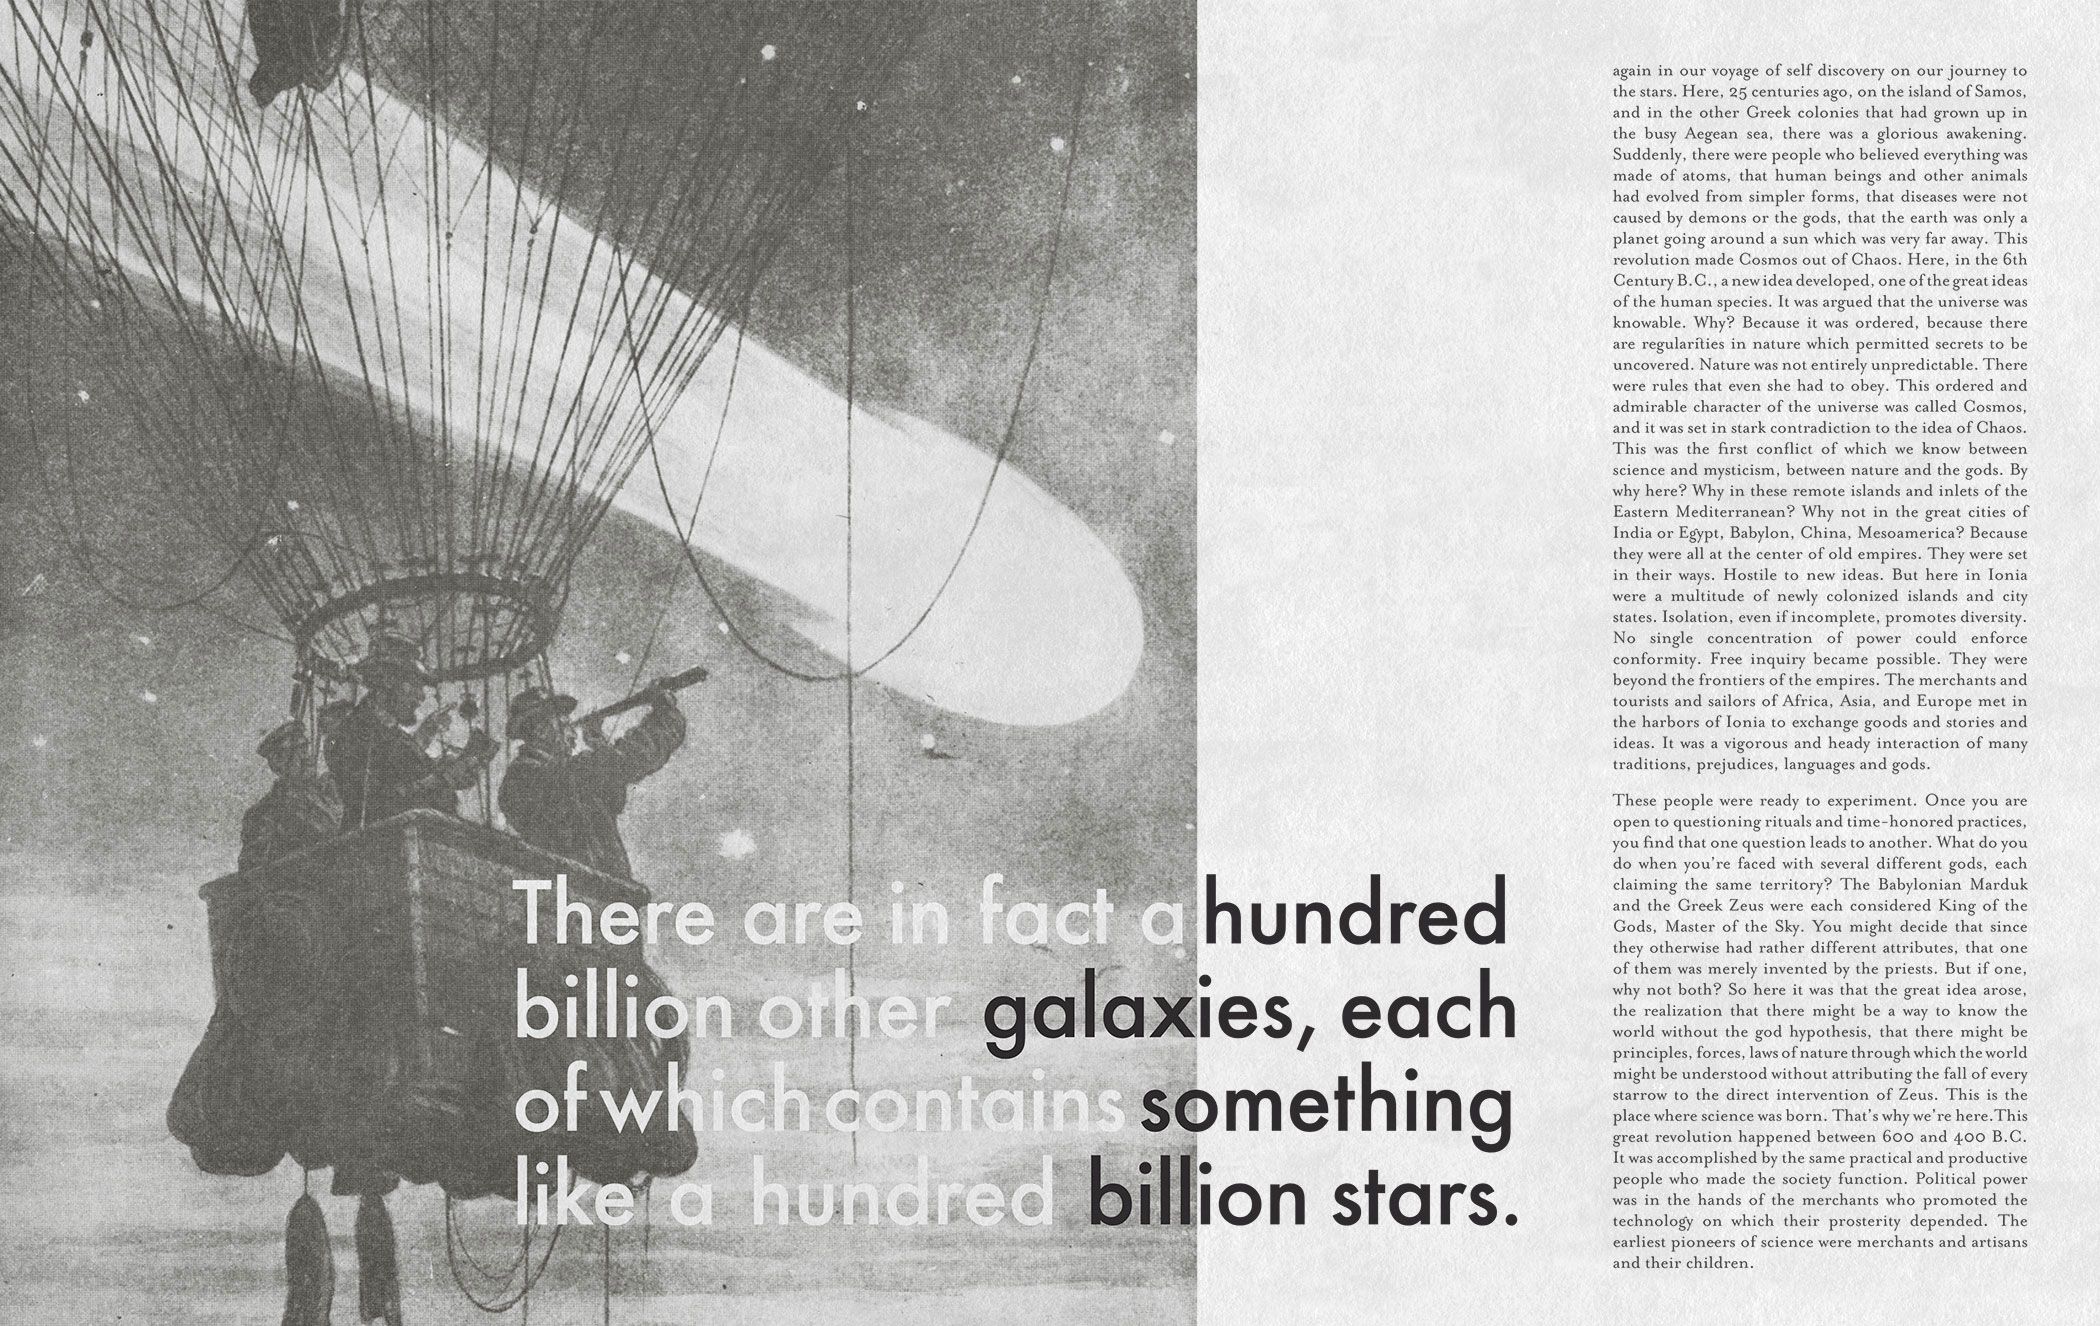 An editorial spread with images, text and an image with a commet filling the sky behind a hot air ballon